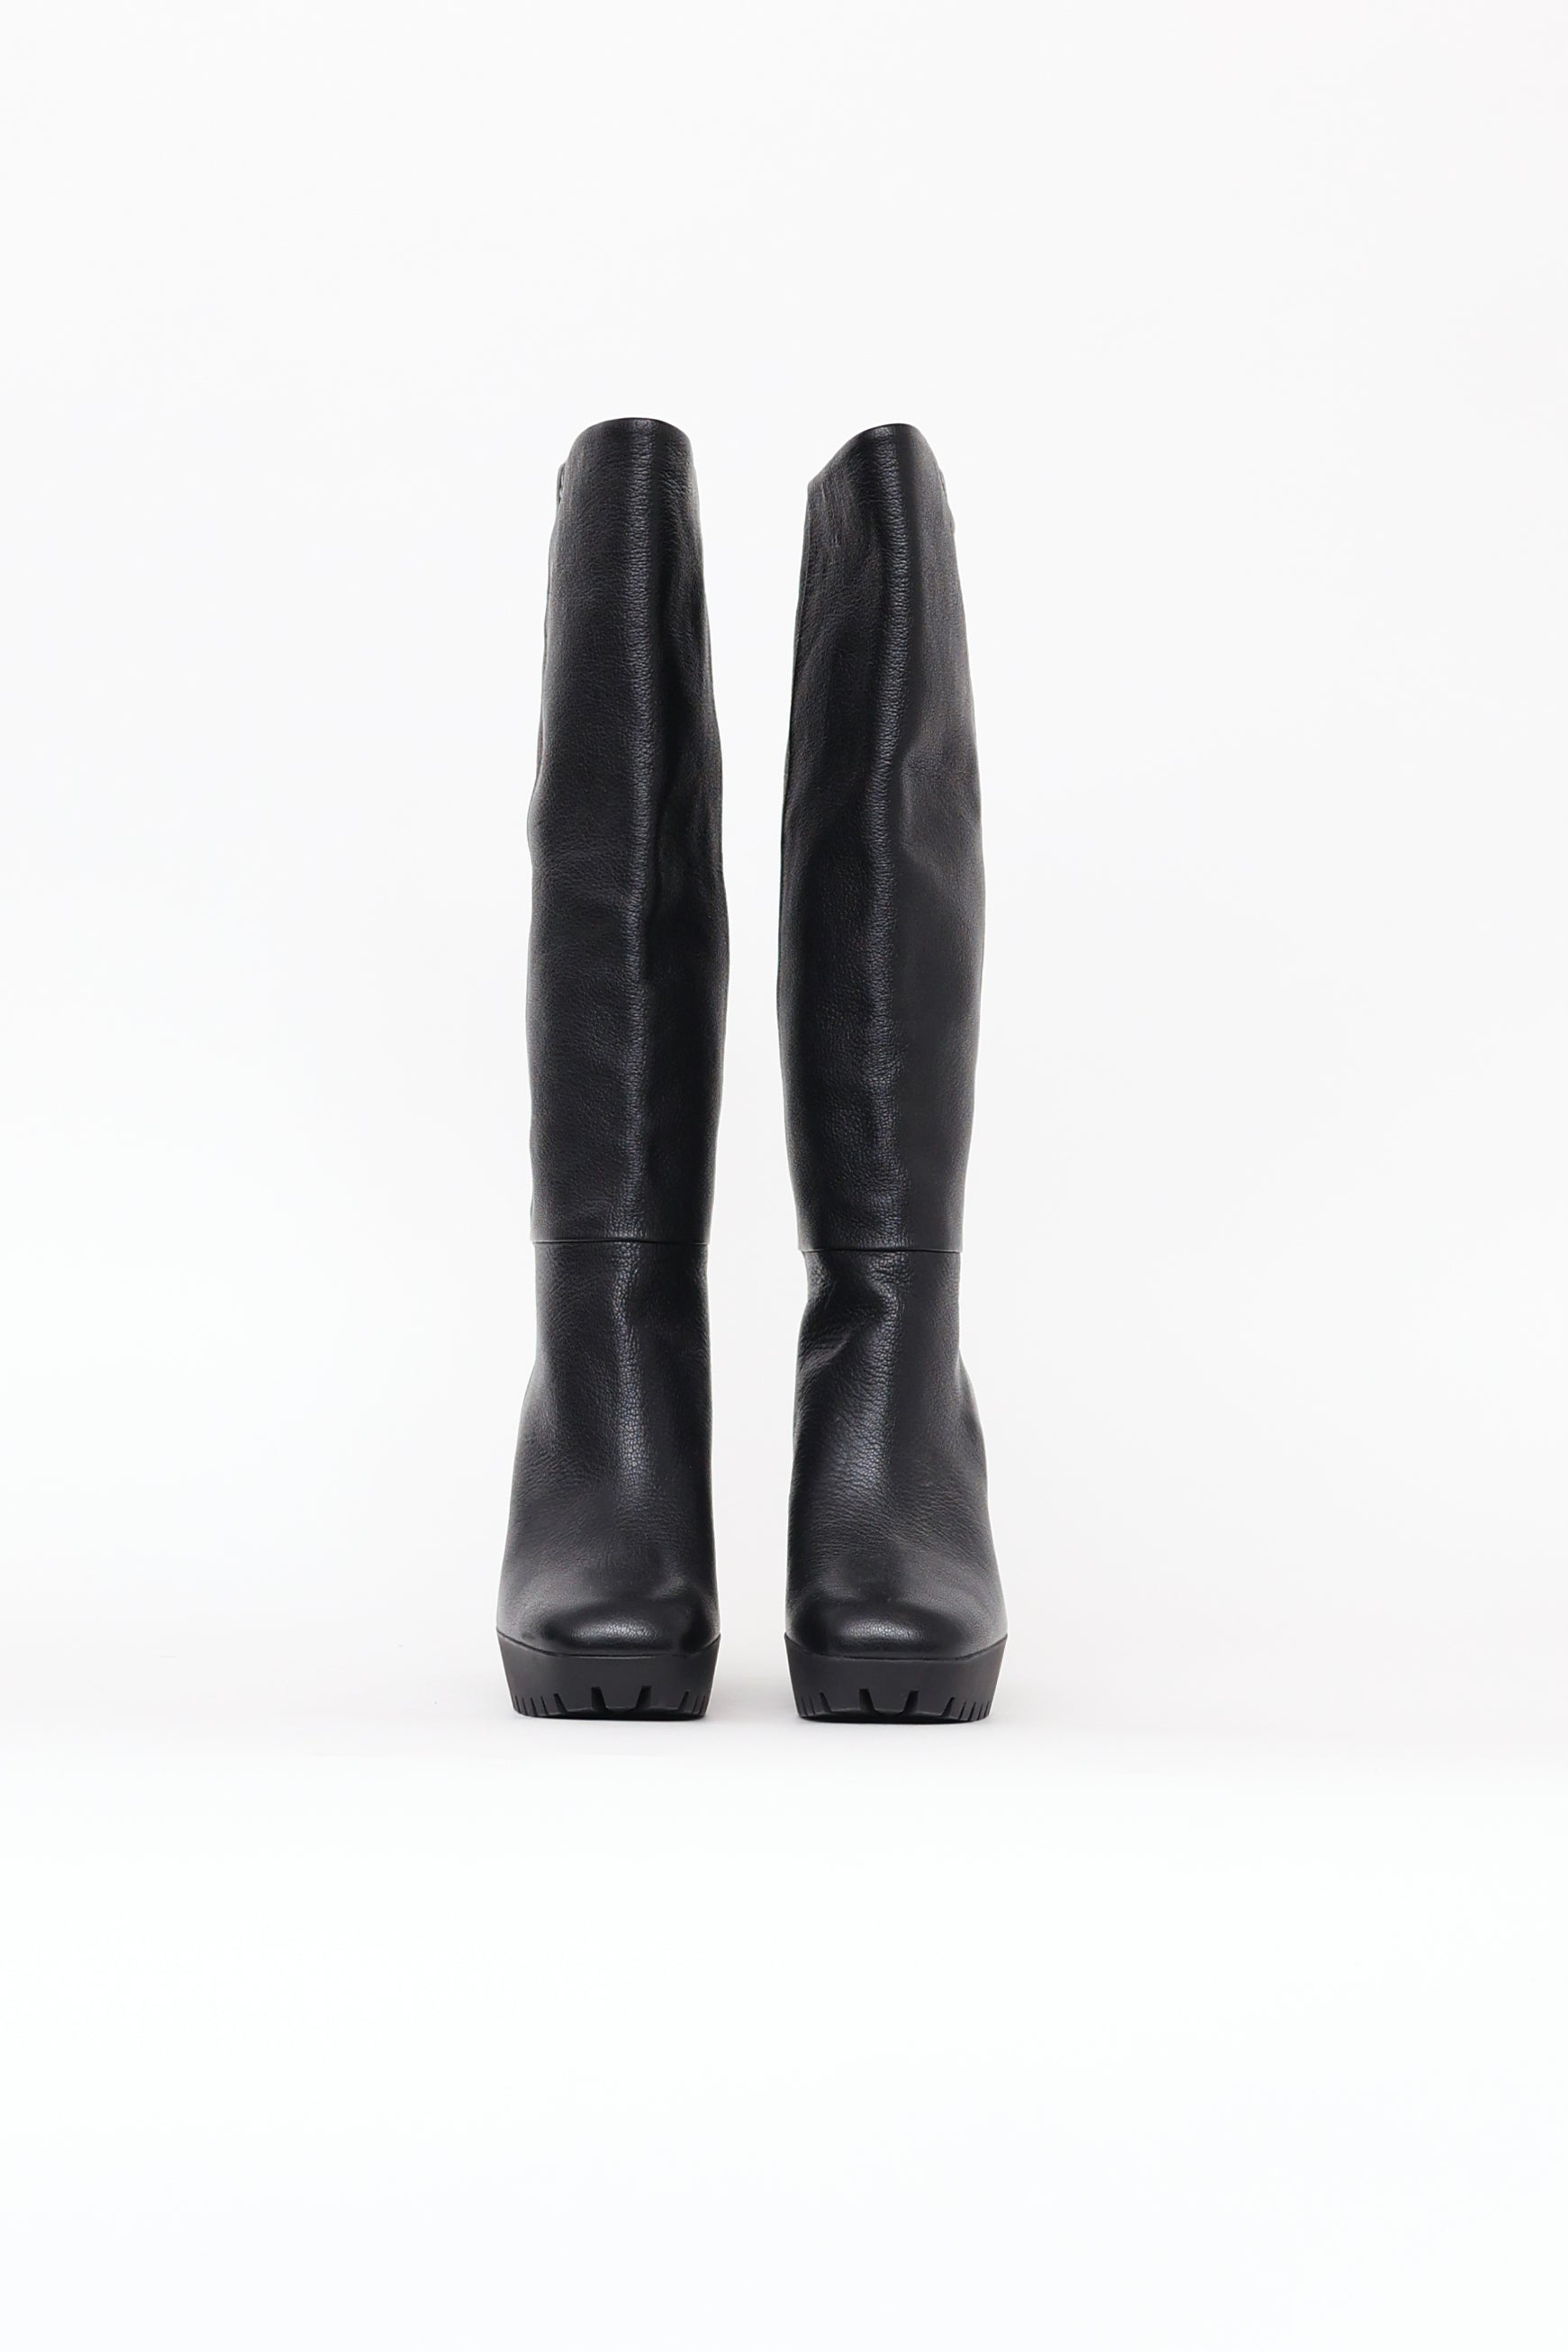 Auto forbandelse virkningsfuldhed Gucci // Black Leather Wedge Boots – VSP Consignment